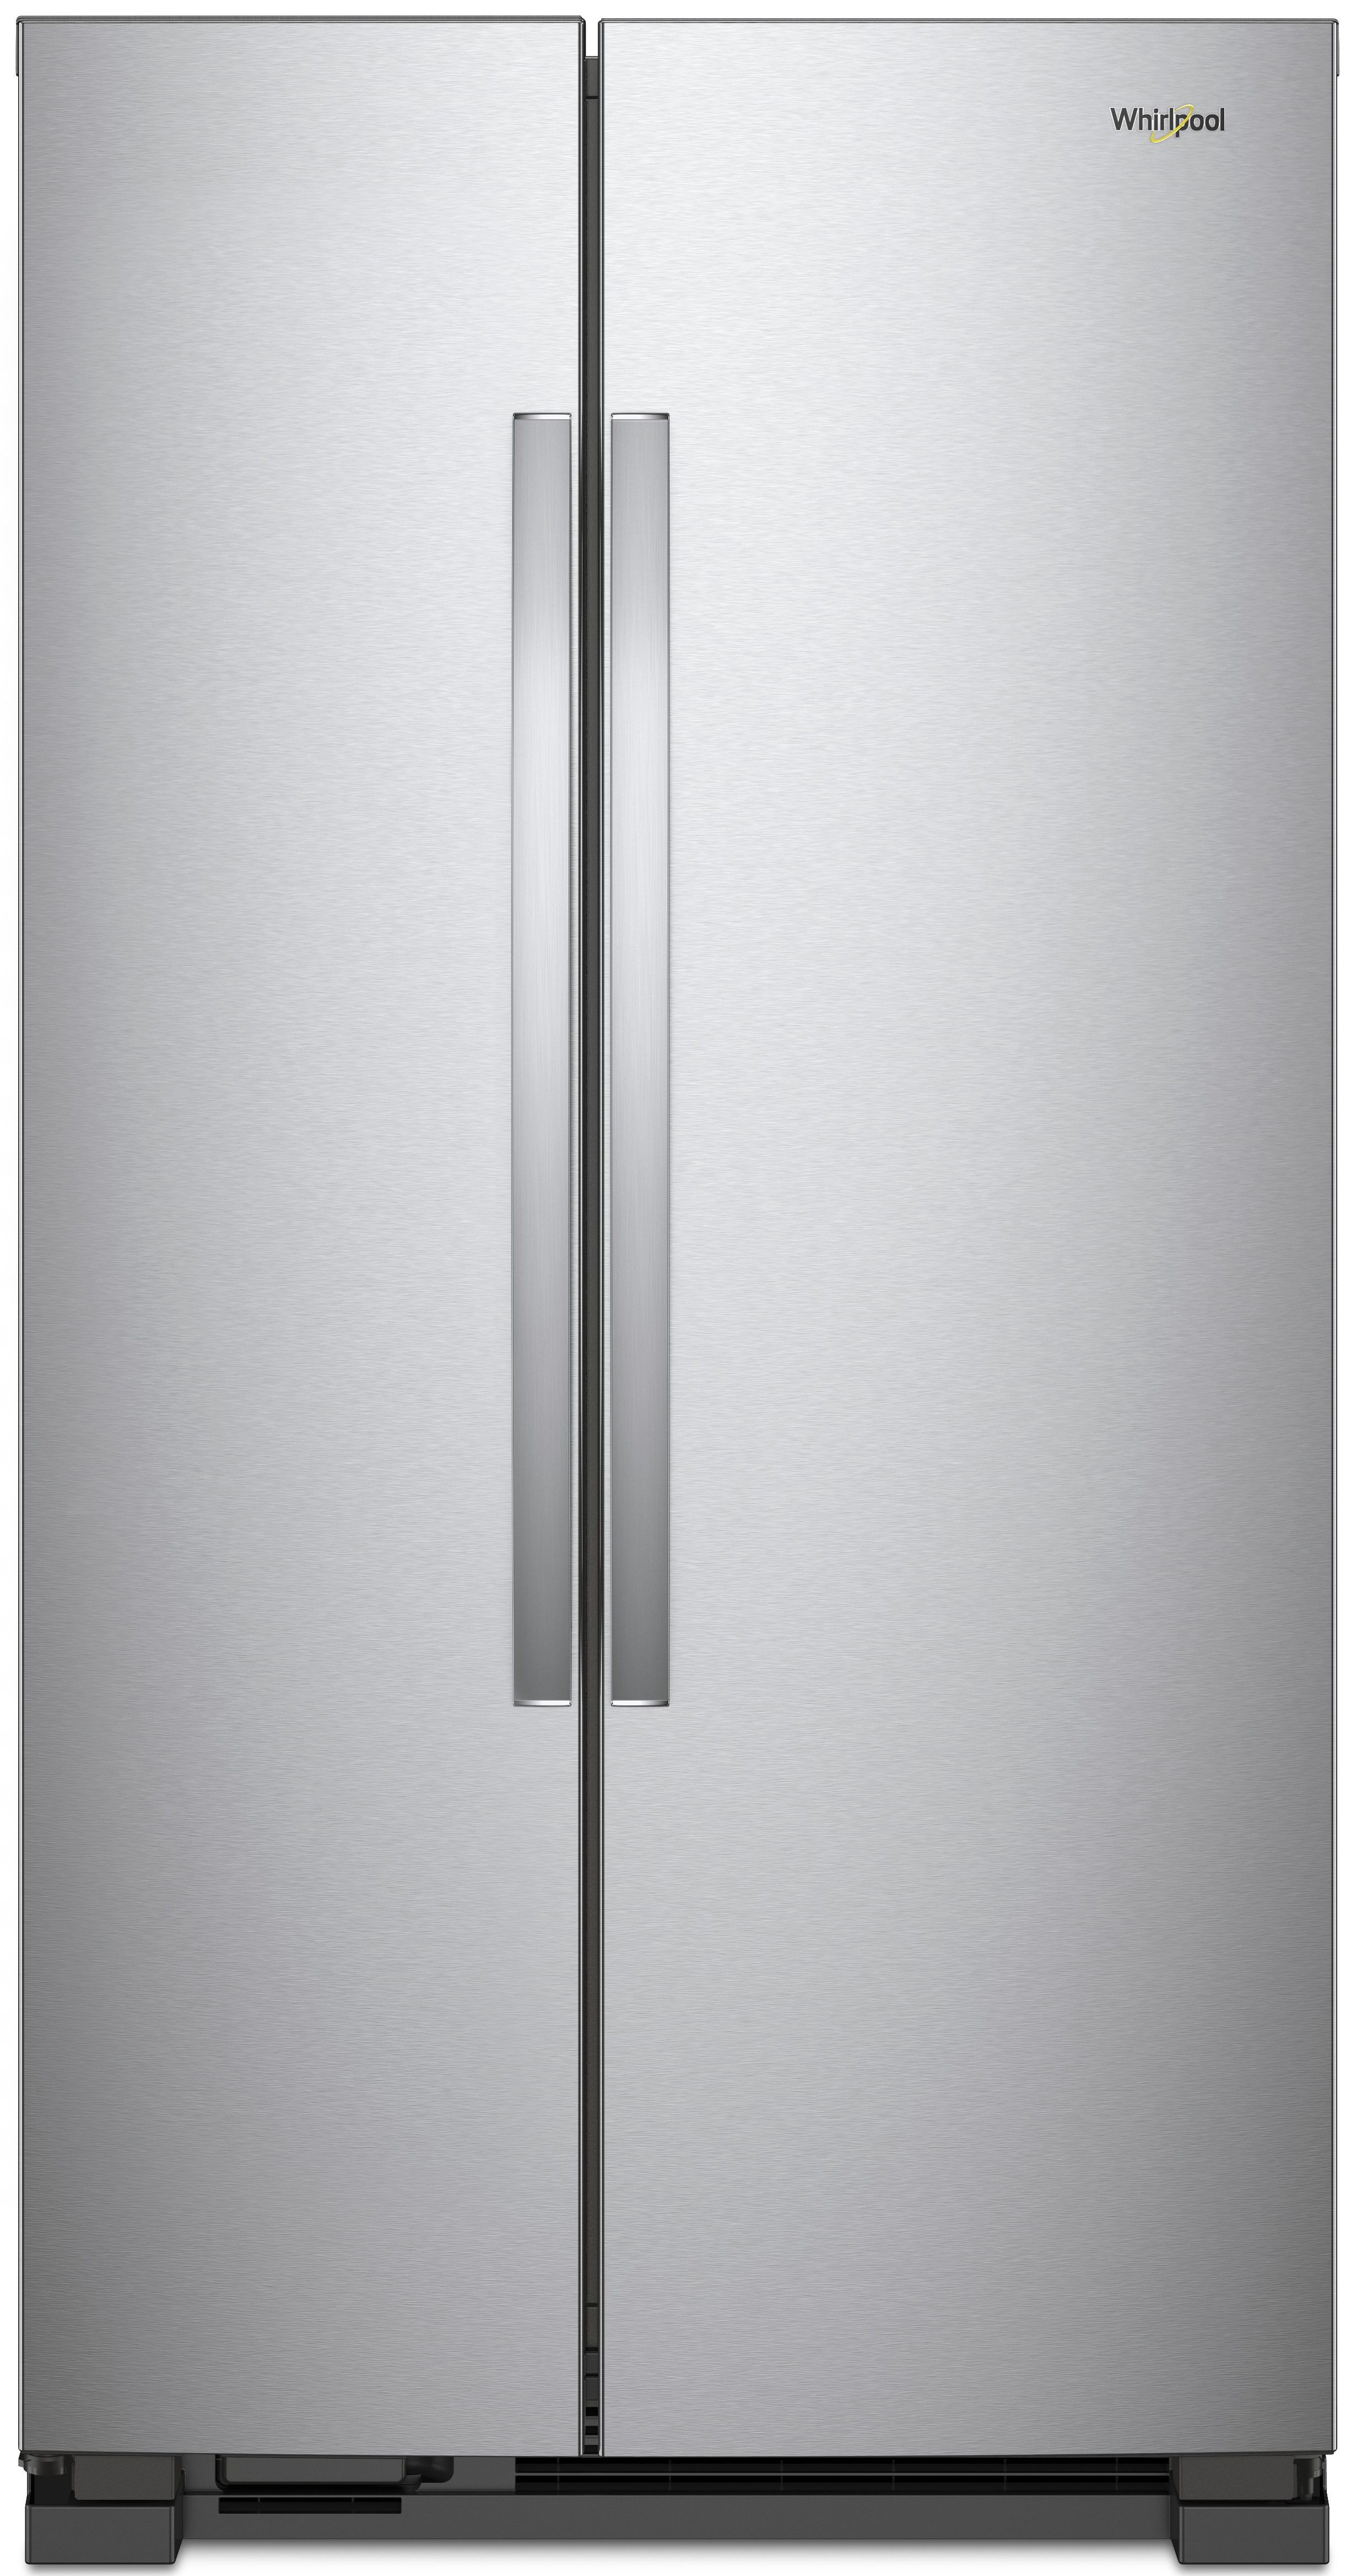 Whirlpool® 22 Cu. Ft. Side-By-Side Refrigerator-Monochromatic Stainless Steel